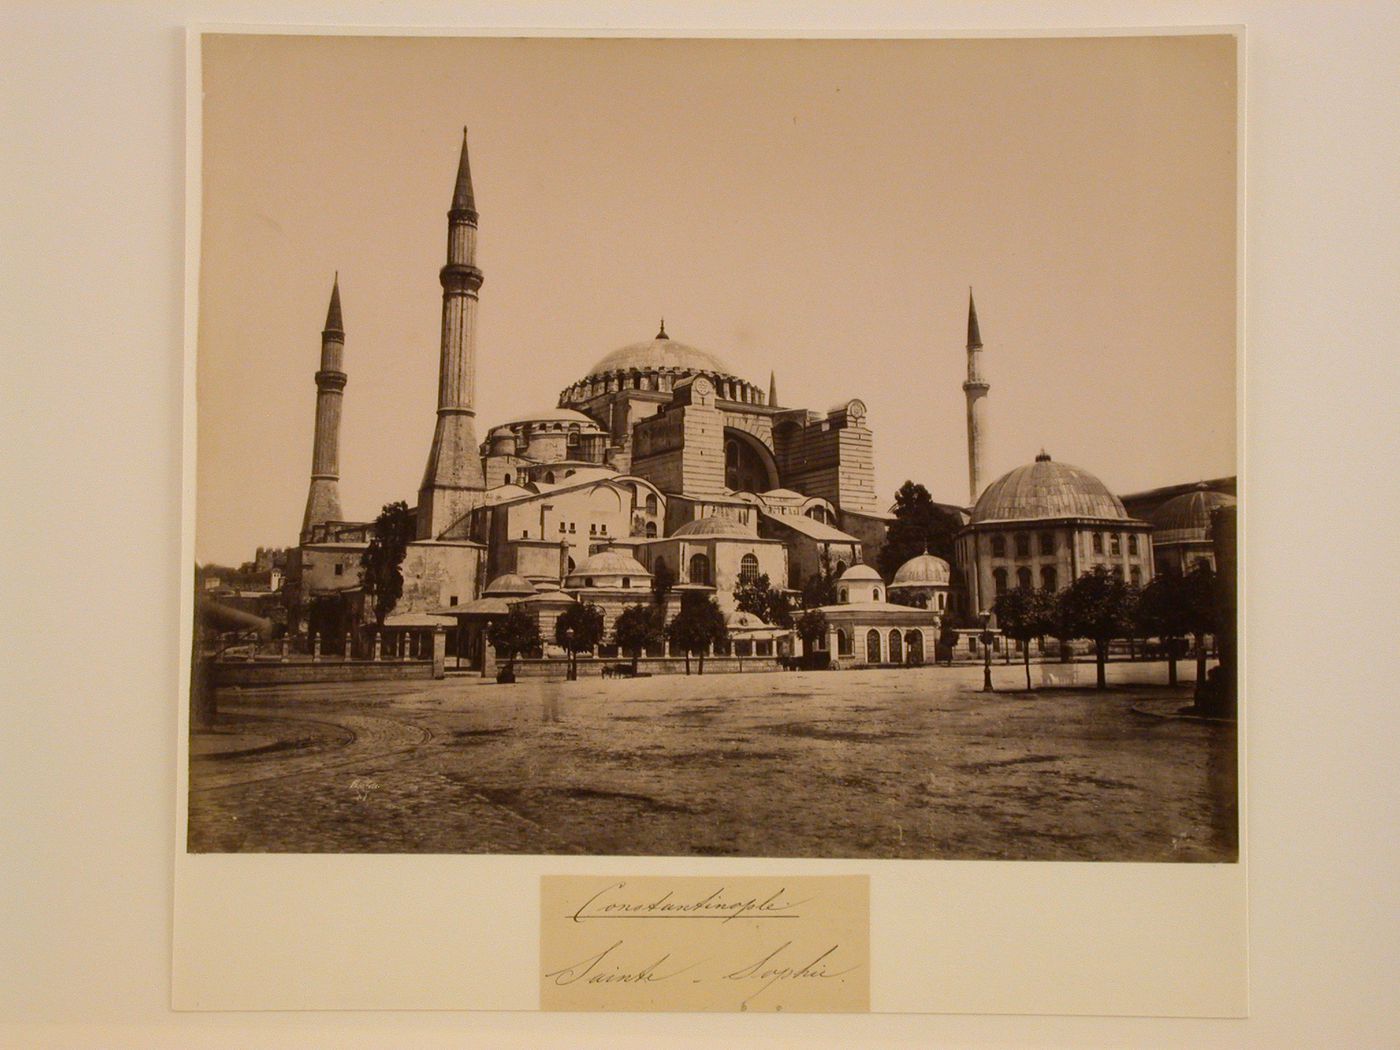 View of Hagia Sophia (also now known as Ayasofya Müzesi), Constantinople (now Istanbul), Ottoman Empire (now in Turkey)